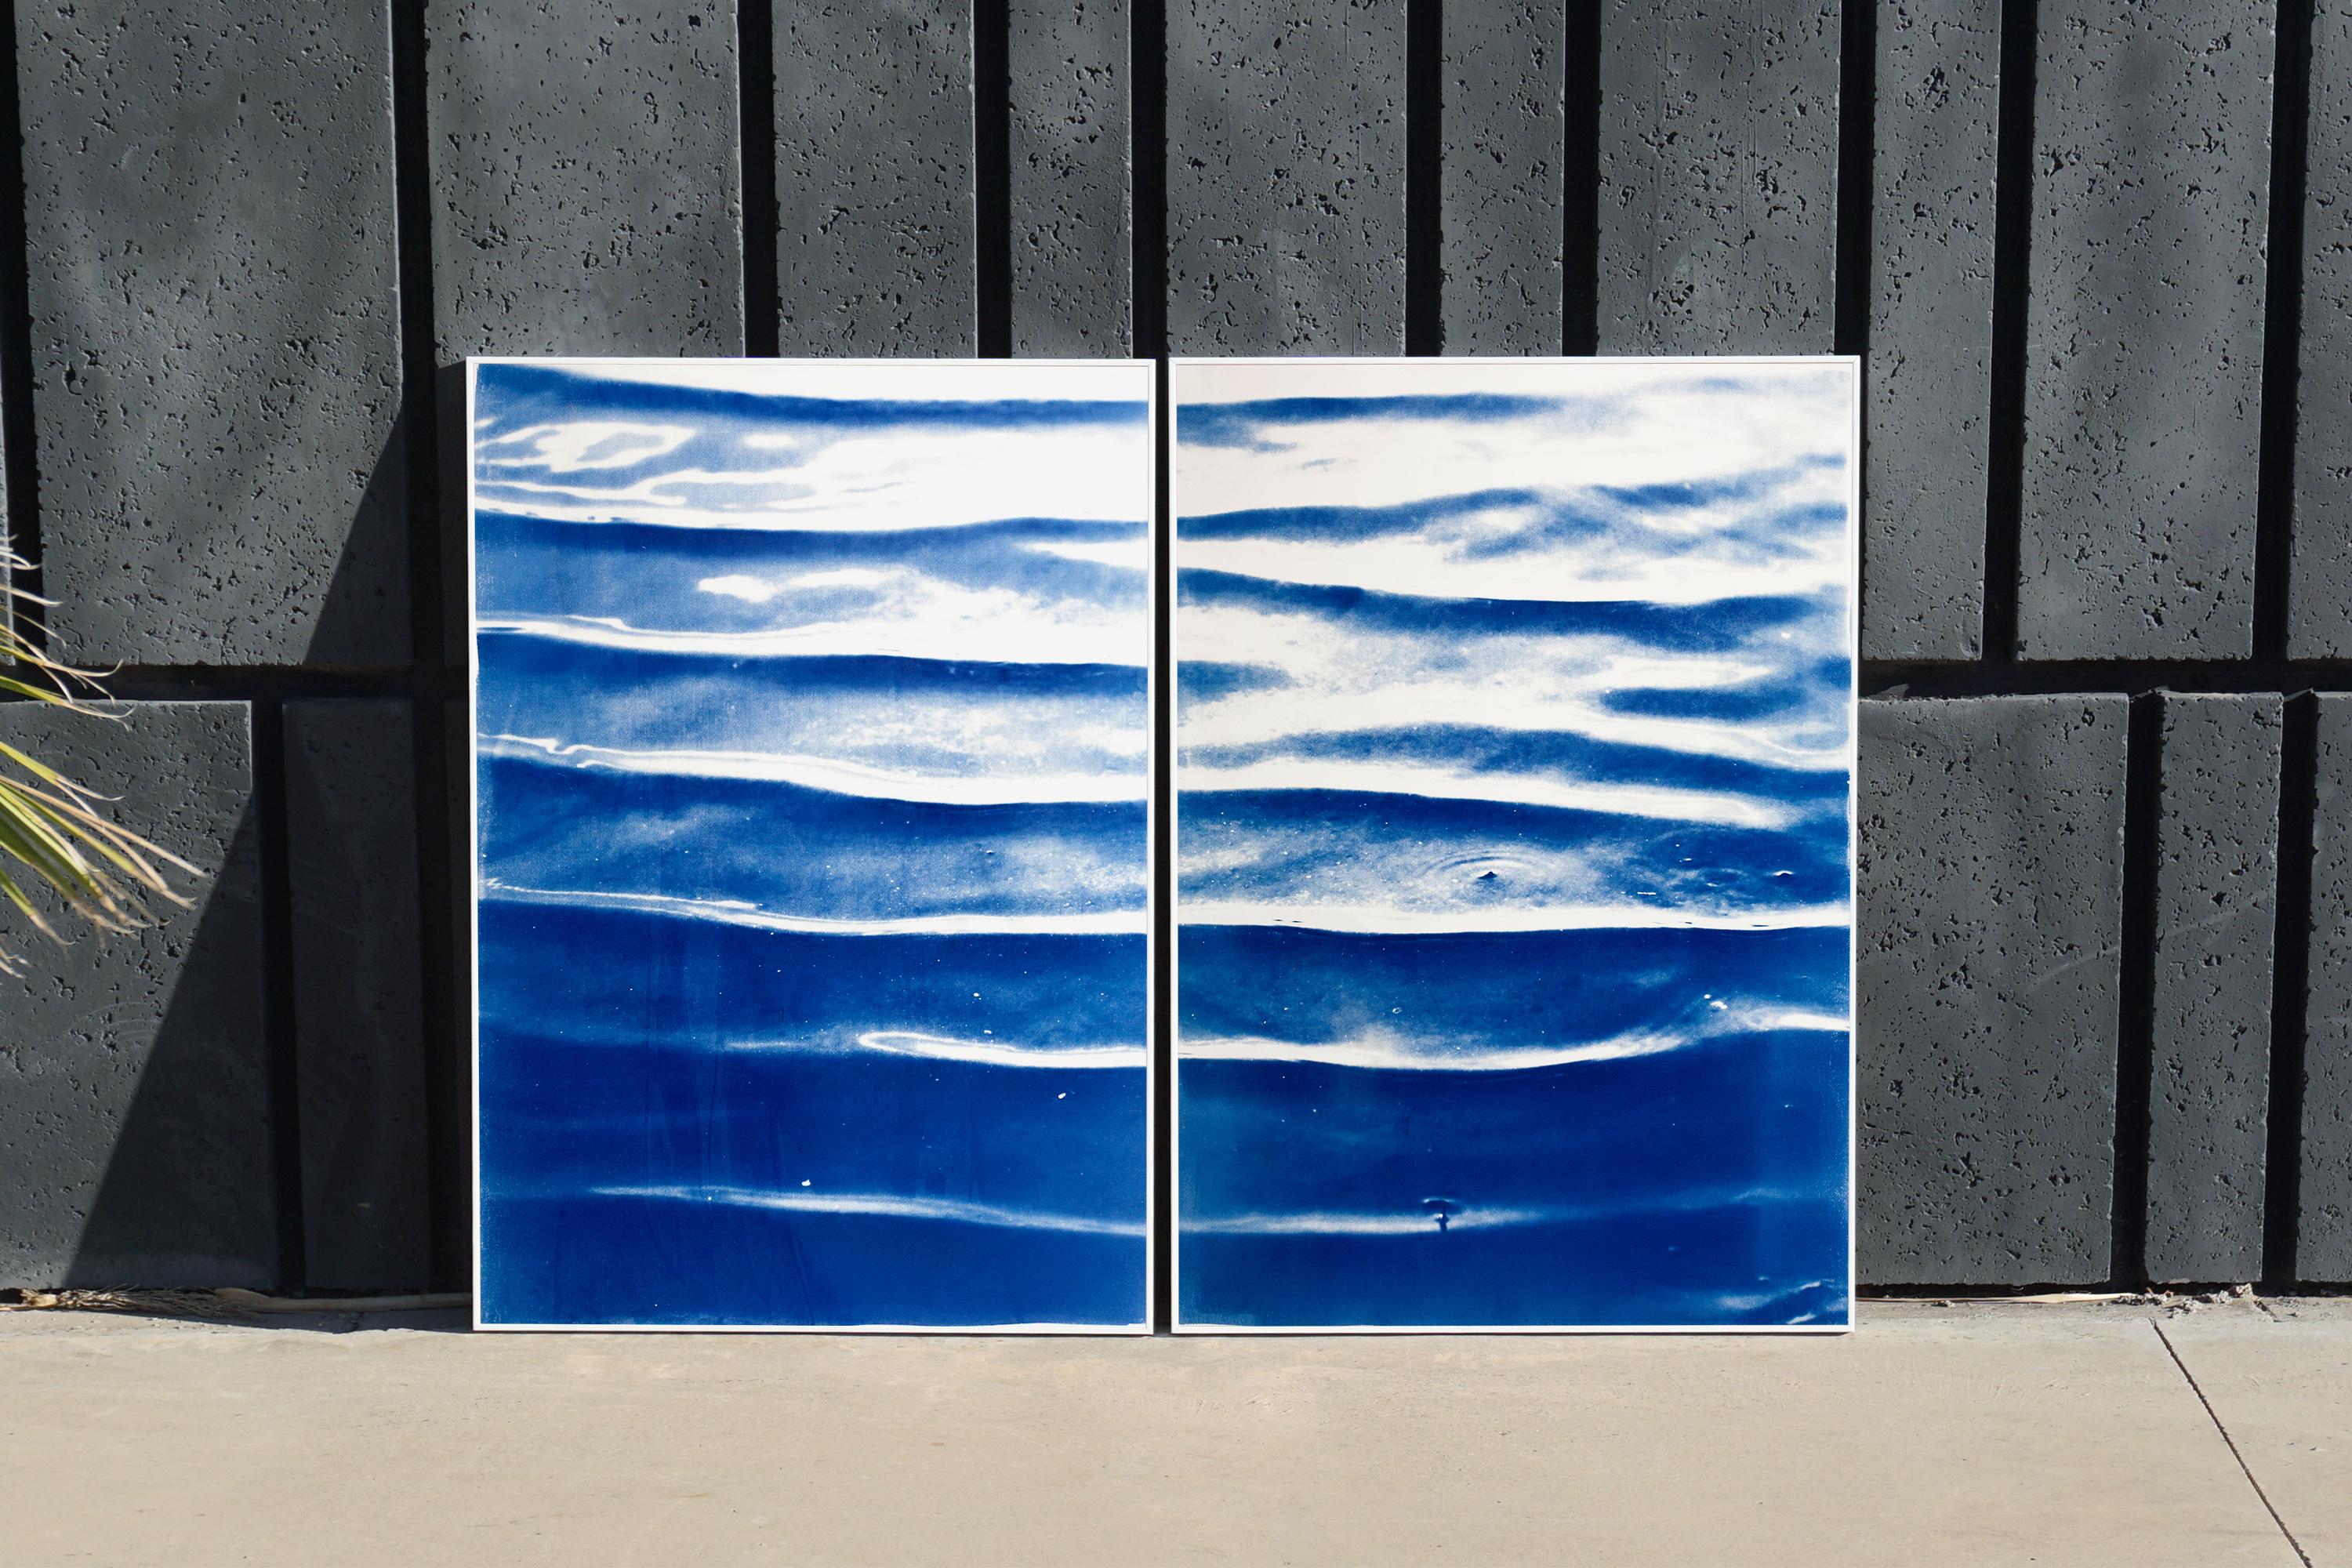 Calm Water Blue Tones Diptych of Japanese Zen Pond Ripples, Feng Shui Cyanotype  - Print by Kind of Cyan